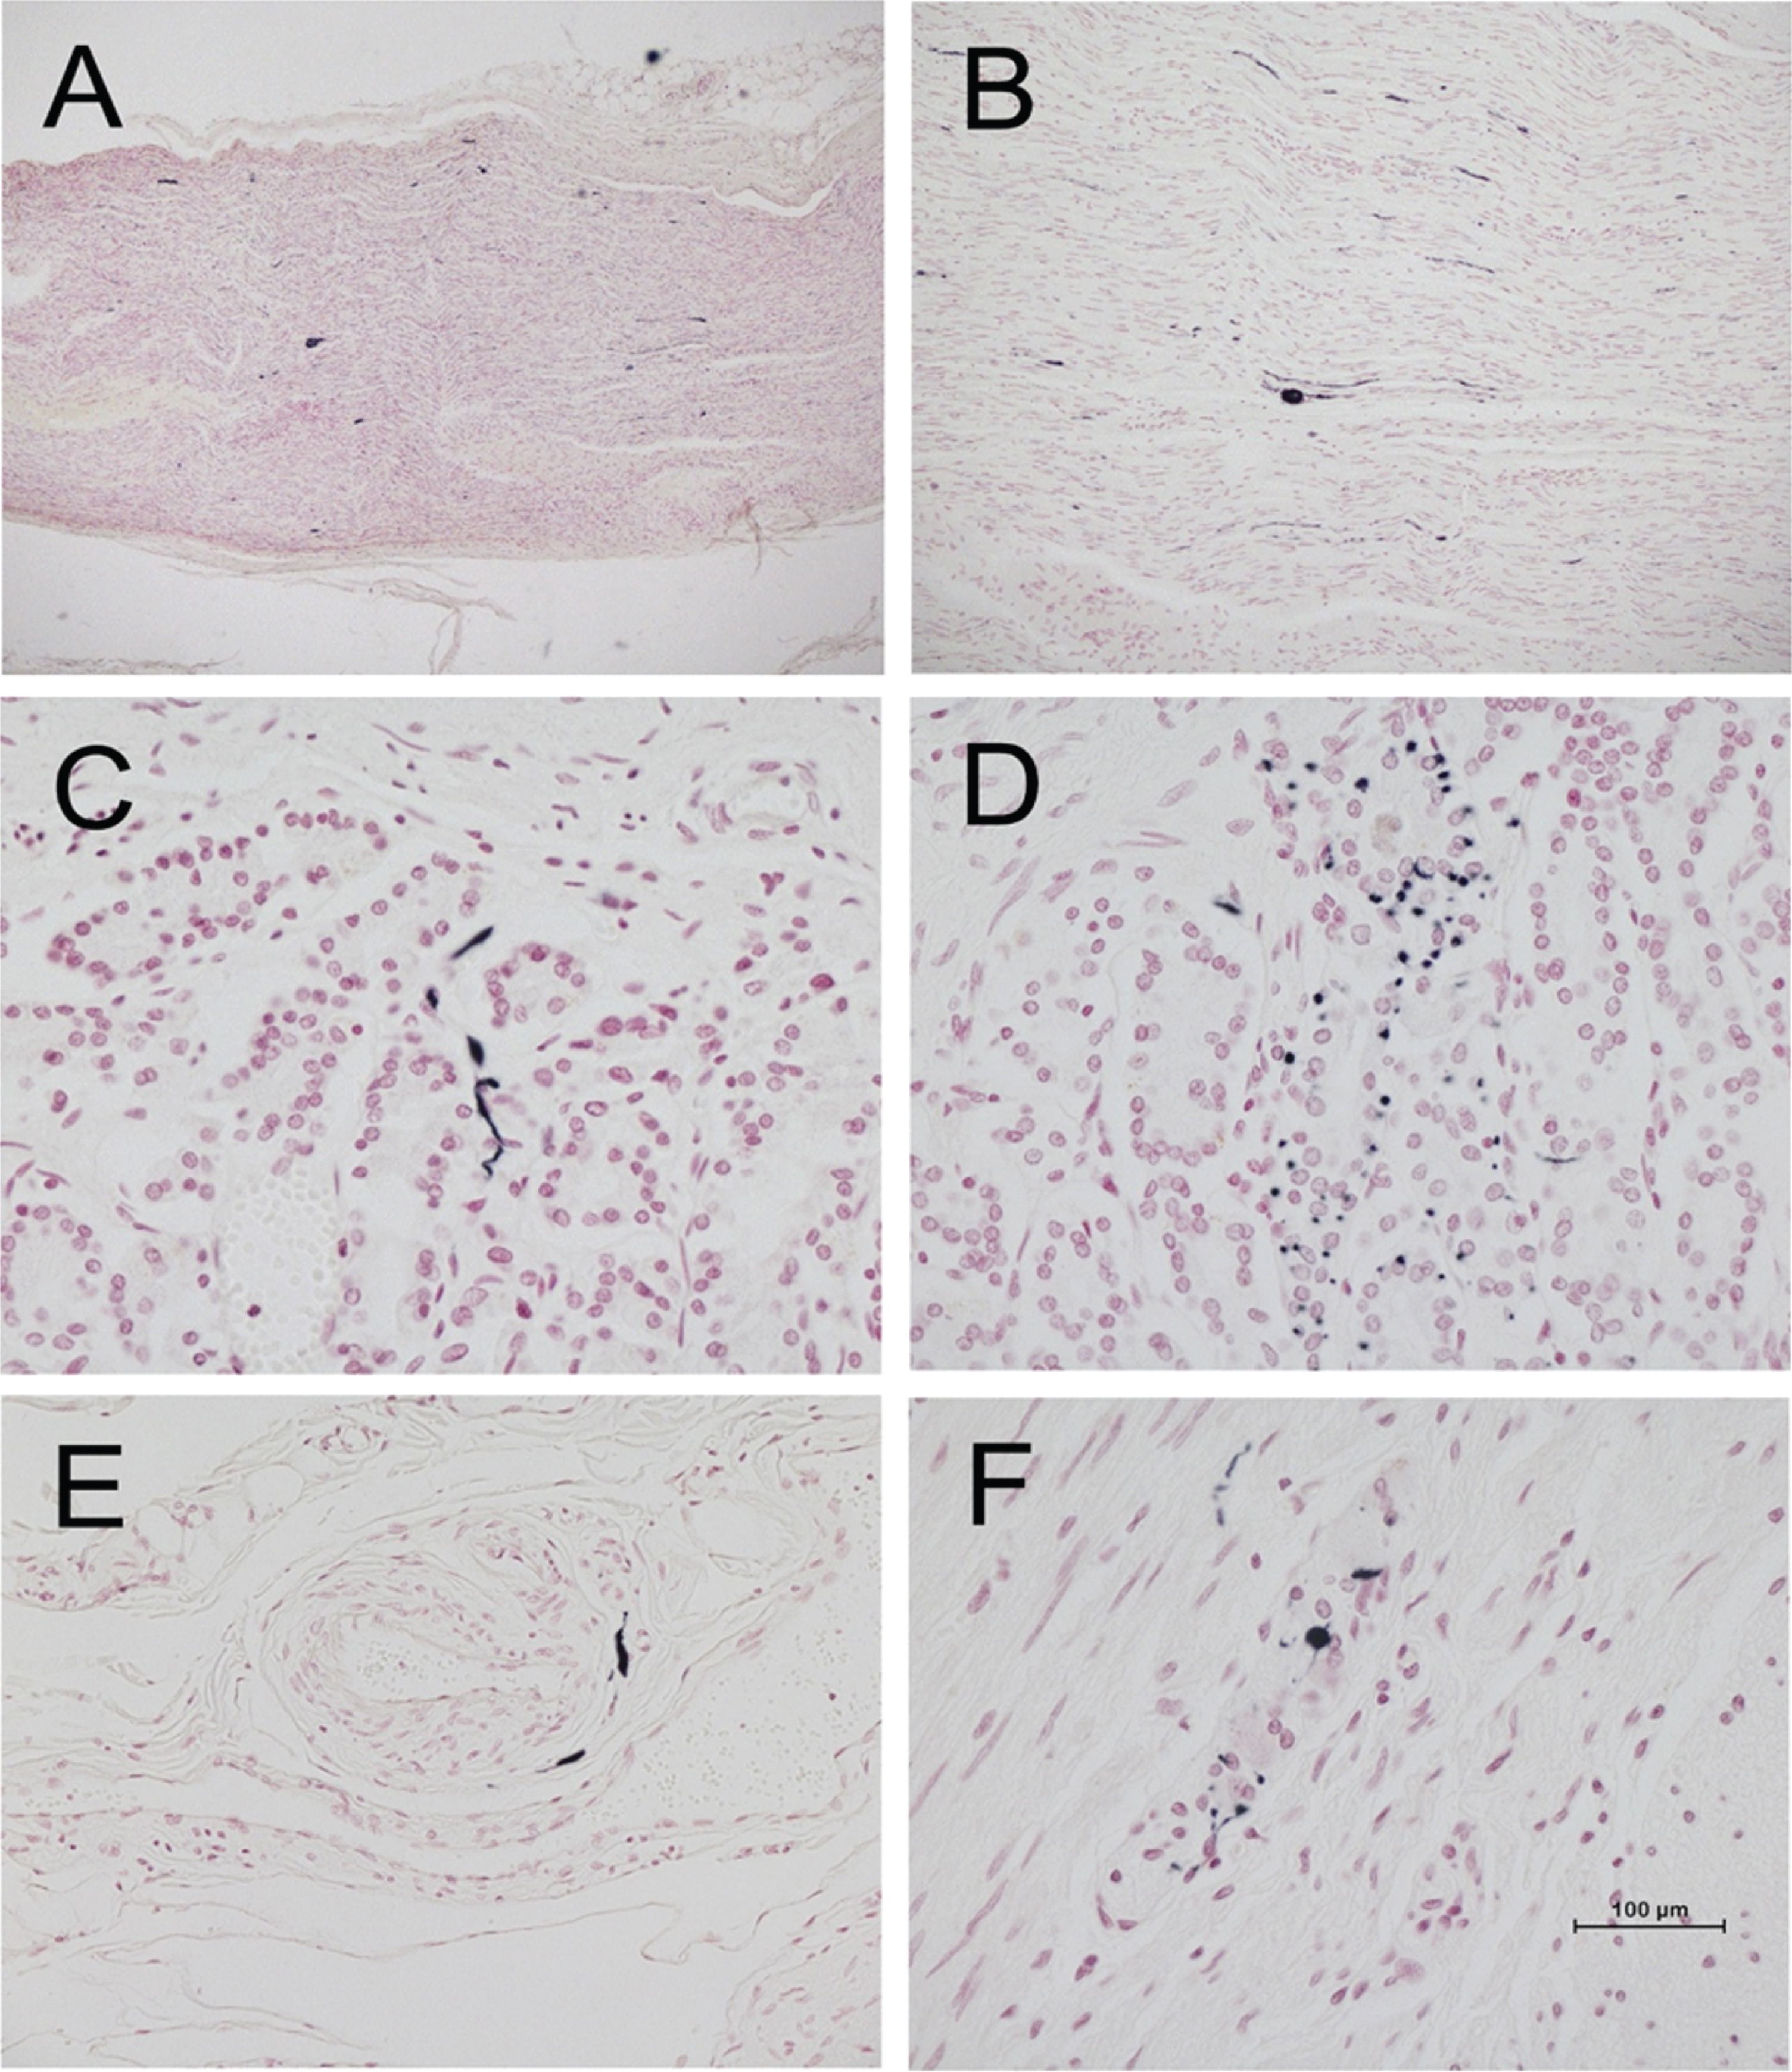 Photomicrographs of vagus nerve and stomach from four different PD subjects, immunohistochemically stained for phosphorylated α-synuclein (black) and counterstained with Neutral Red (red). A and B are longitudinal sections of vagus nerve at low (A) and medium (B) magnification. C and D show short fibers and puncta in the stomach mucosa. E shows short fibers applied to the peripheral surface on an arteriole in the submucosa. F shows puncta within an intermyenteric ganglion. Calibration bar in F represents 100μm for C-F, 400μm for B and 800μm for A.